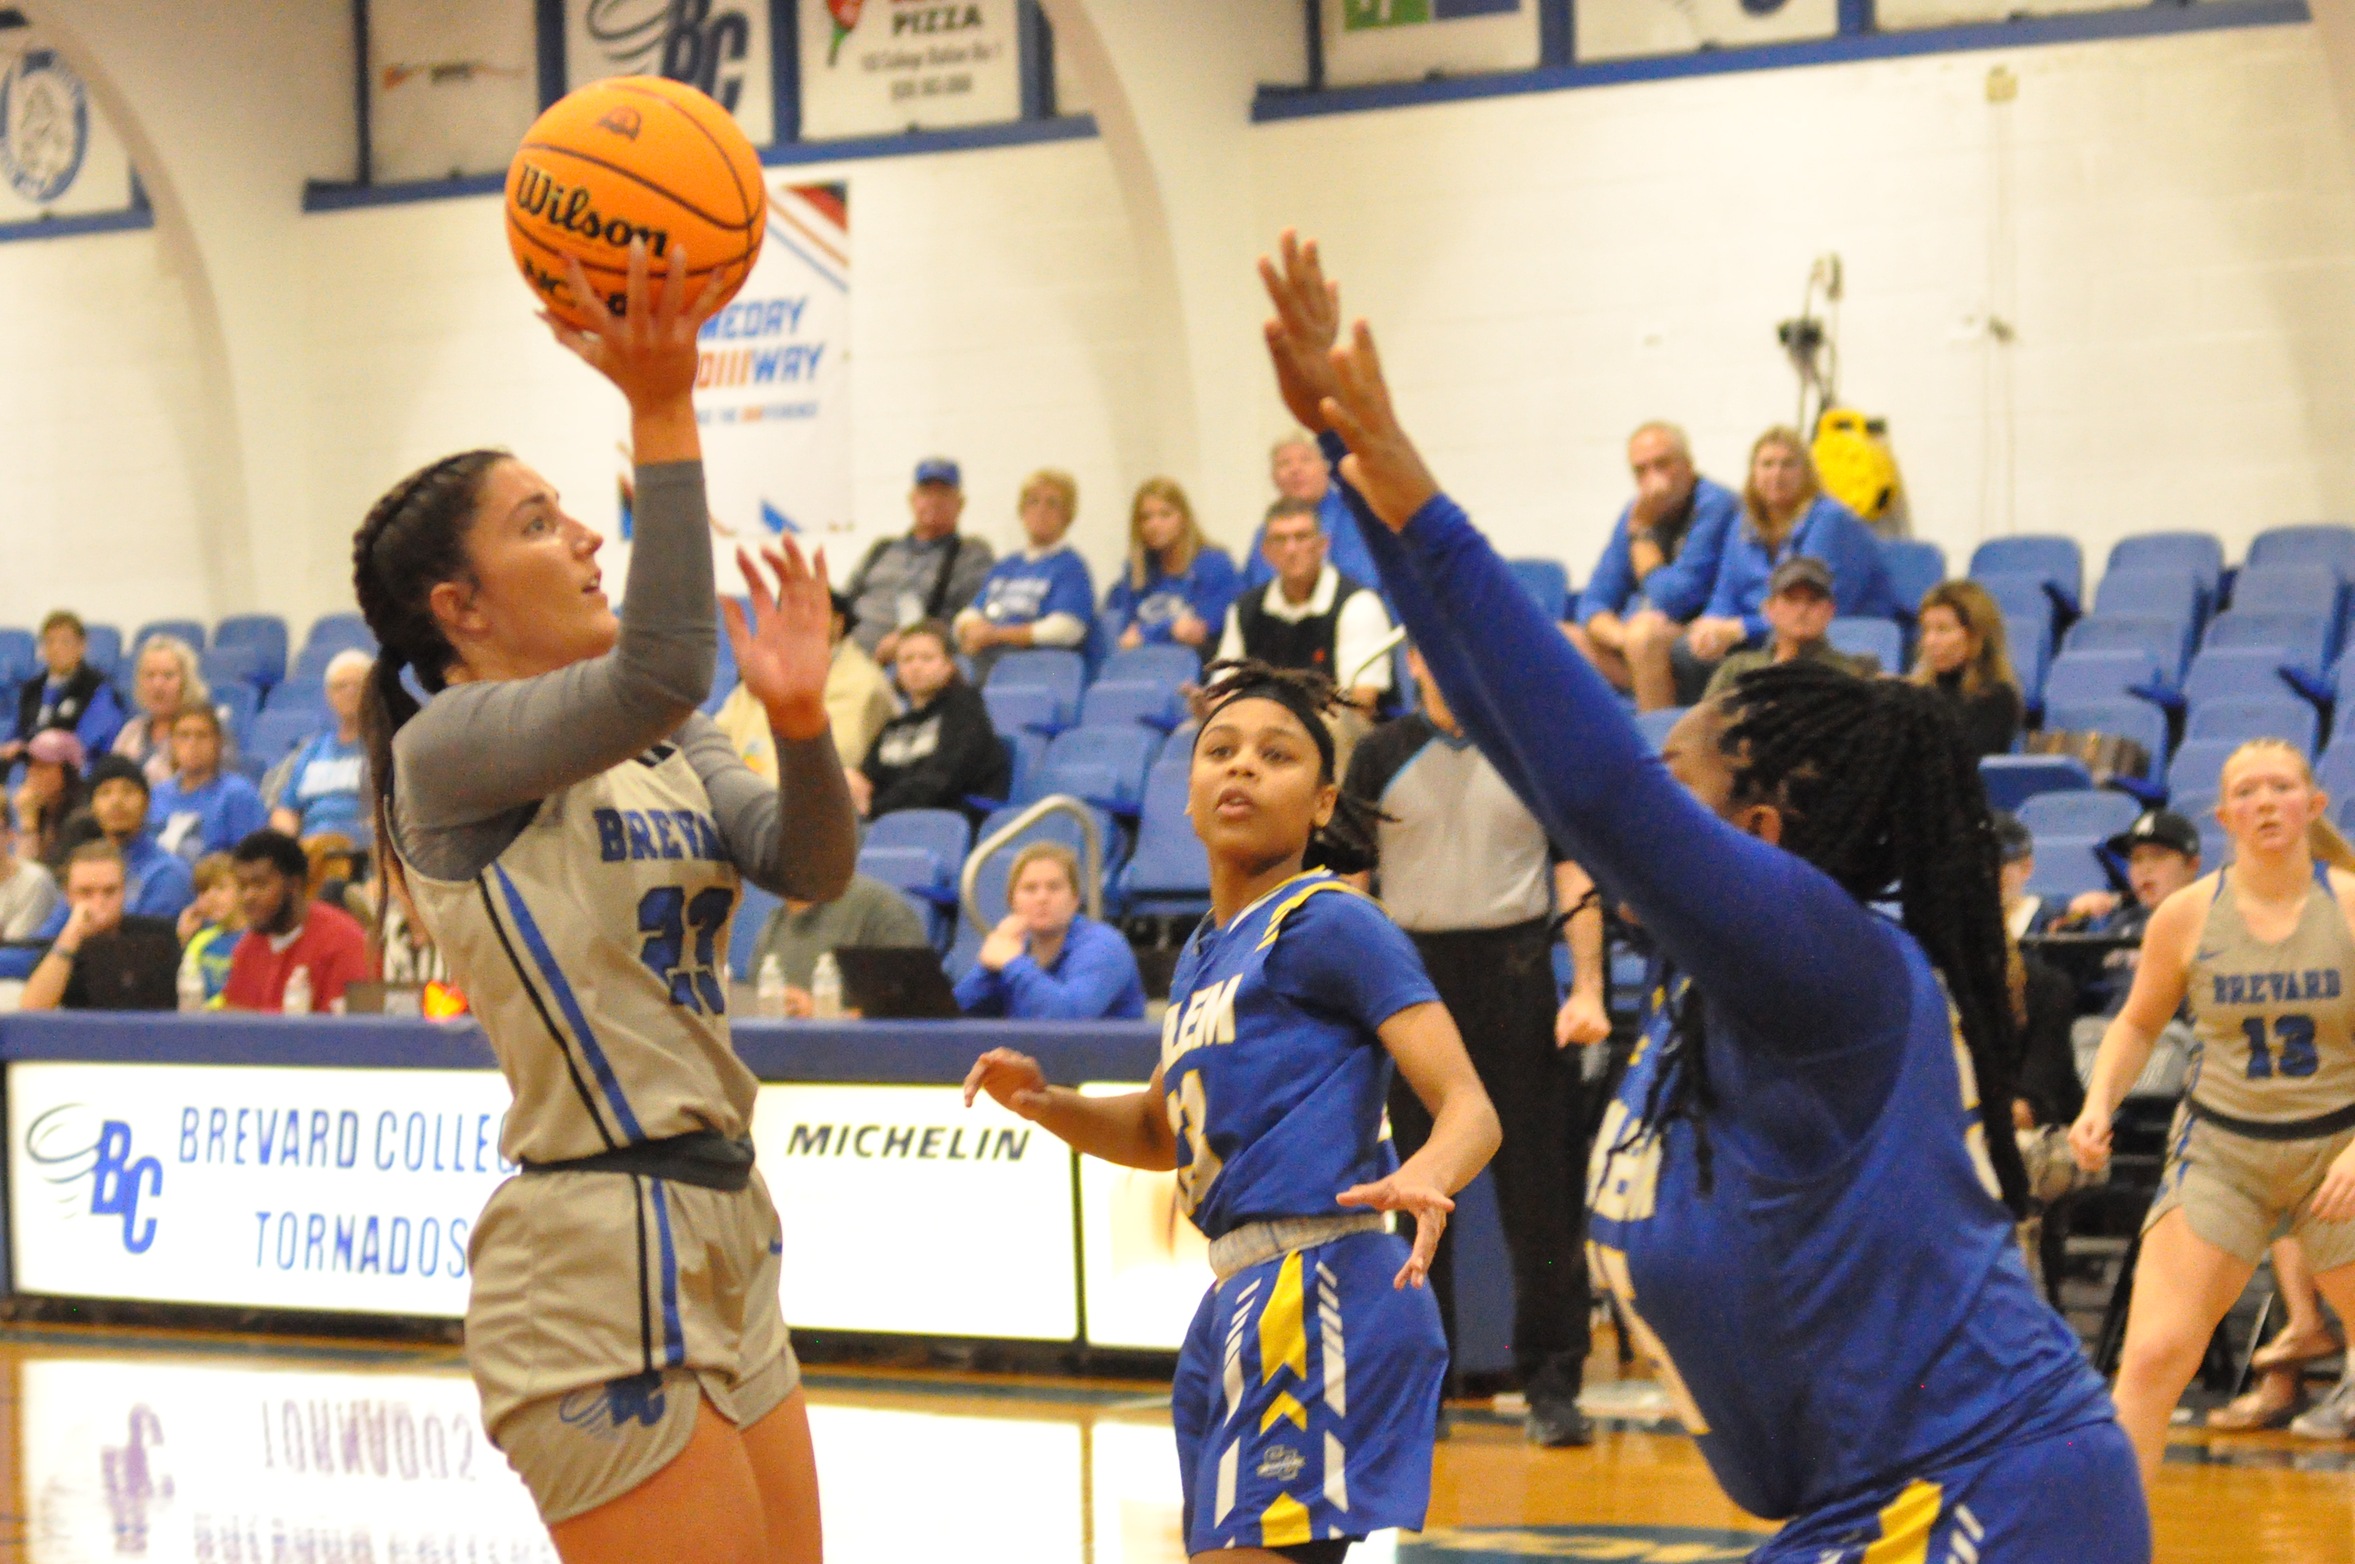 Tornados Stay Unbeaten in Conference with 96-Point Outburst in Win over Salem